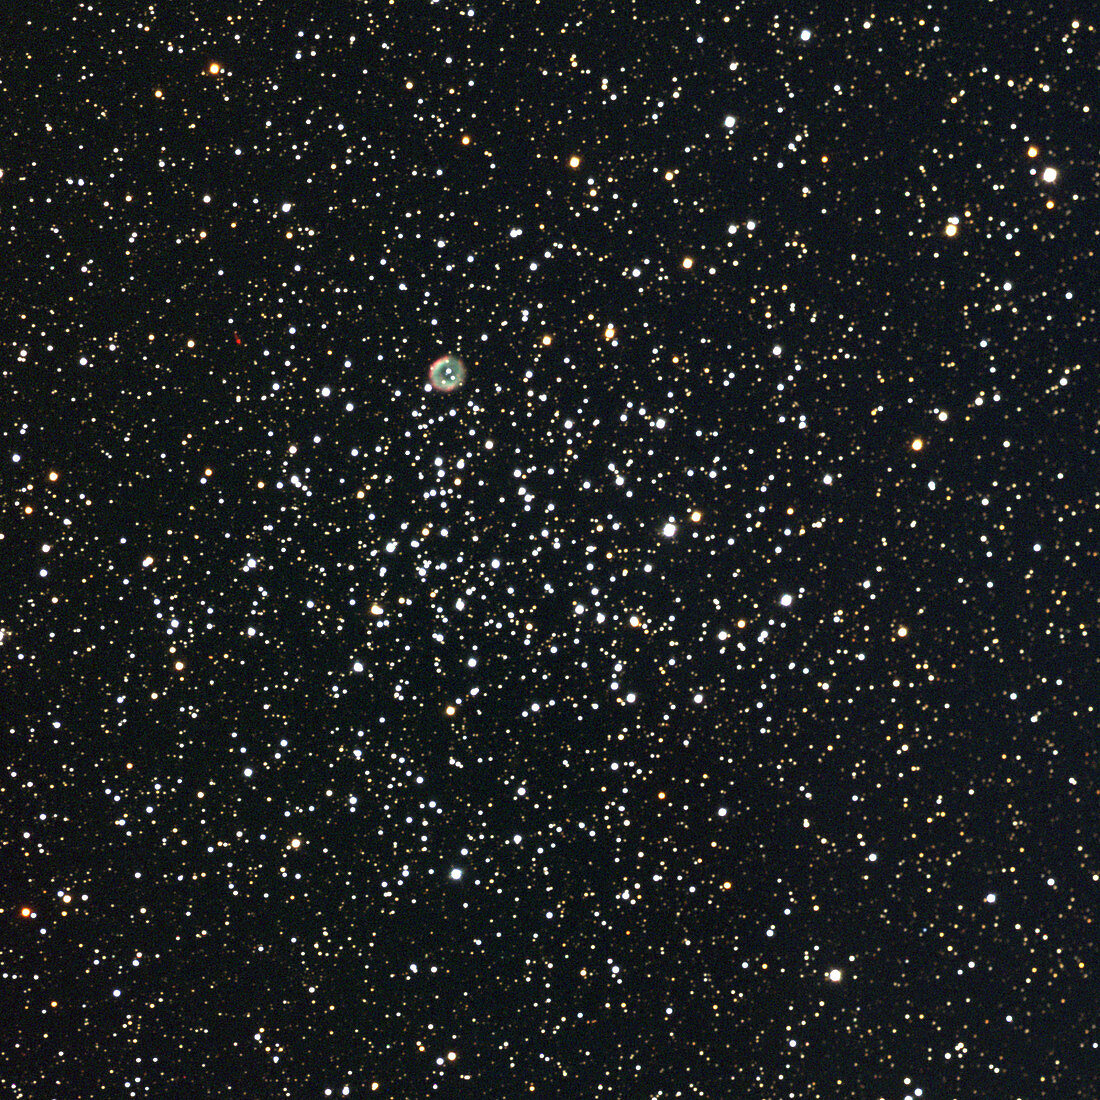 Open star cluster M46